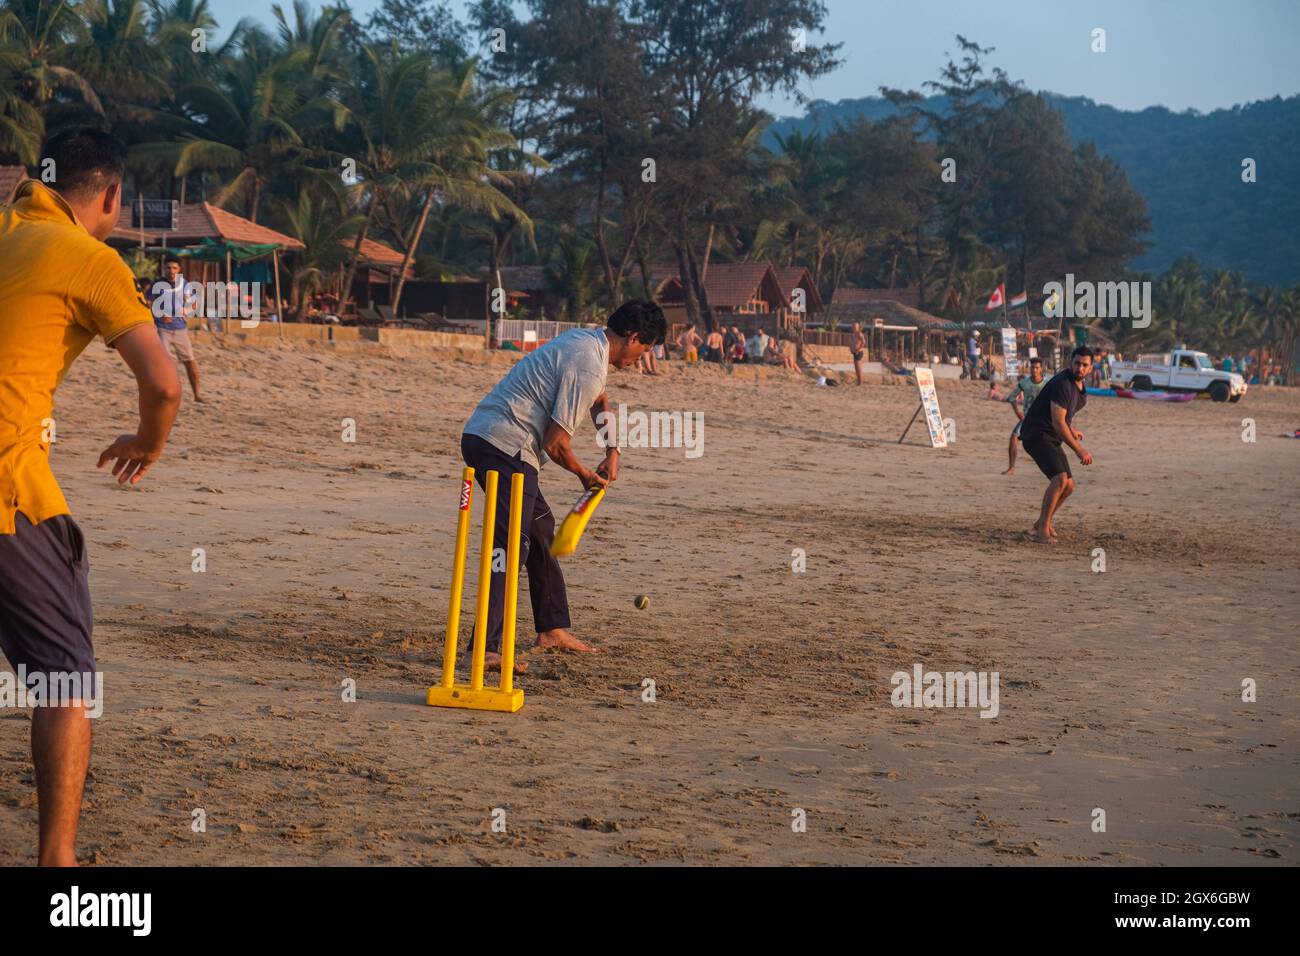 Group of Indian adults playing cricket on beach at sunset, Goa, India Stock Photo